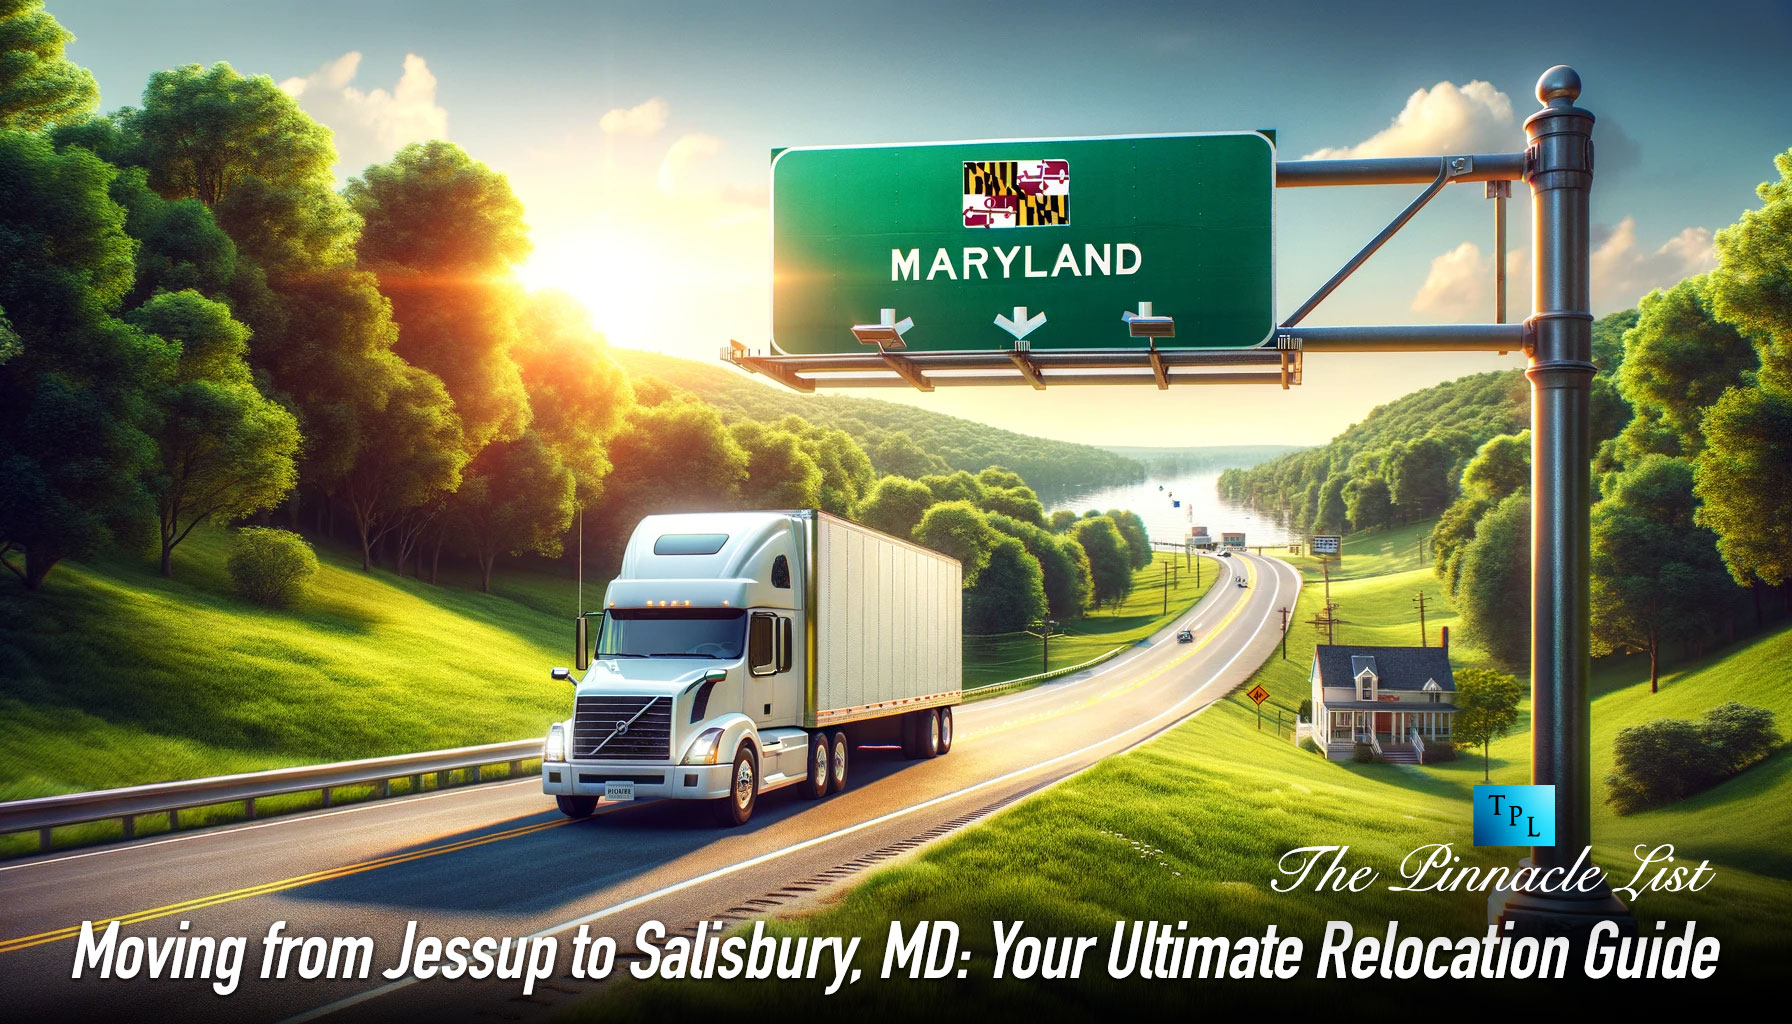 Moving from Jessup to Salisbury, MD: Your Ultimate Relocation Guide